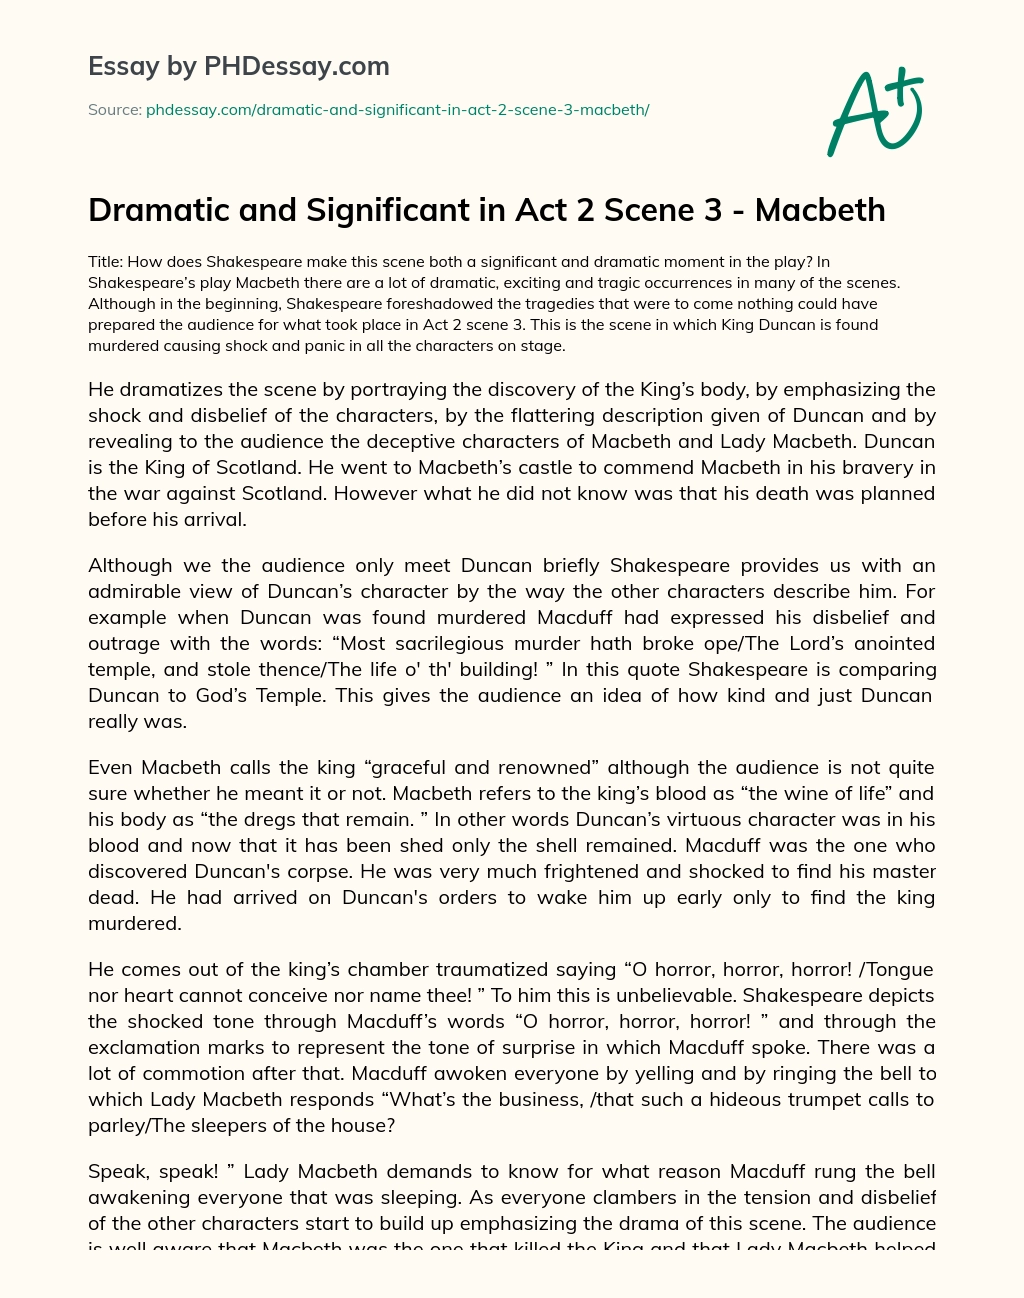 Dramatic and Significant in Act 2 Scene 3 – Macbeth essay